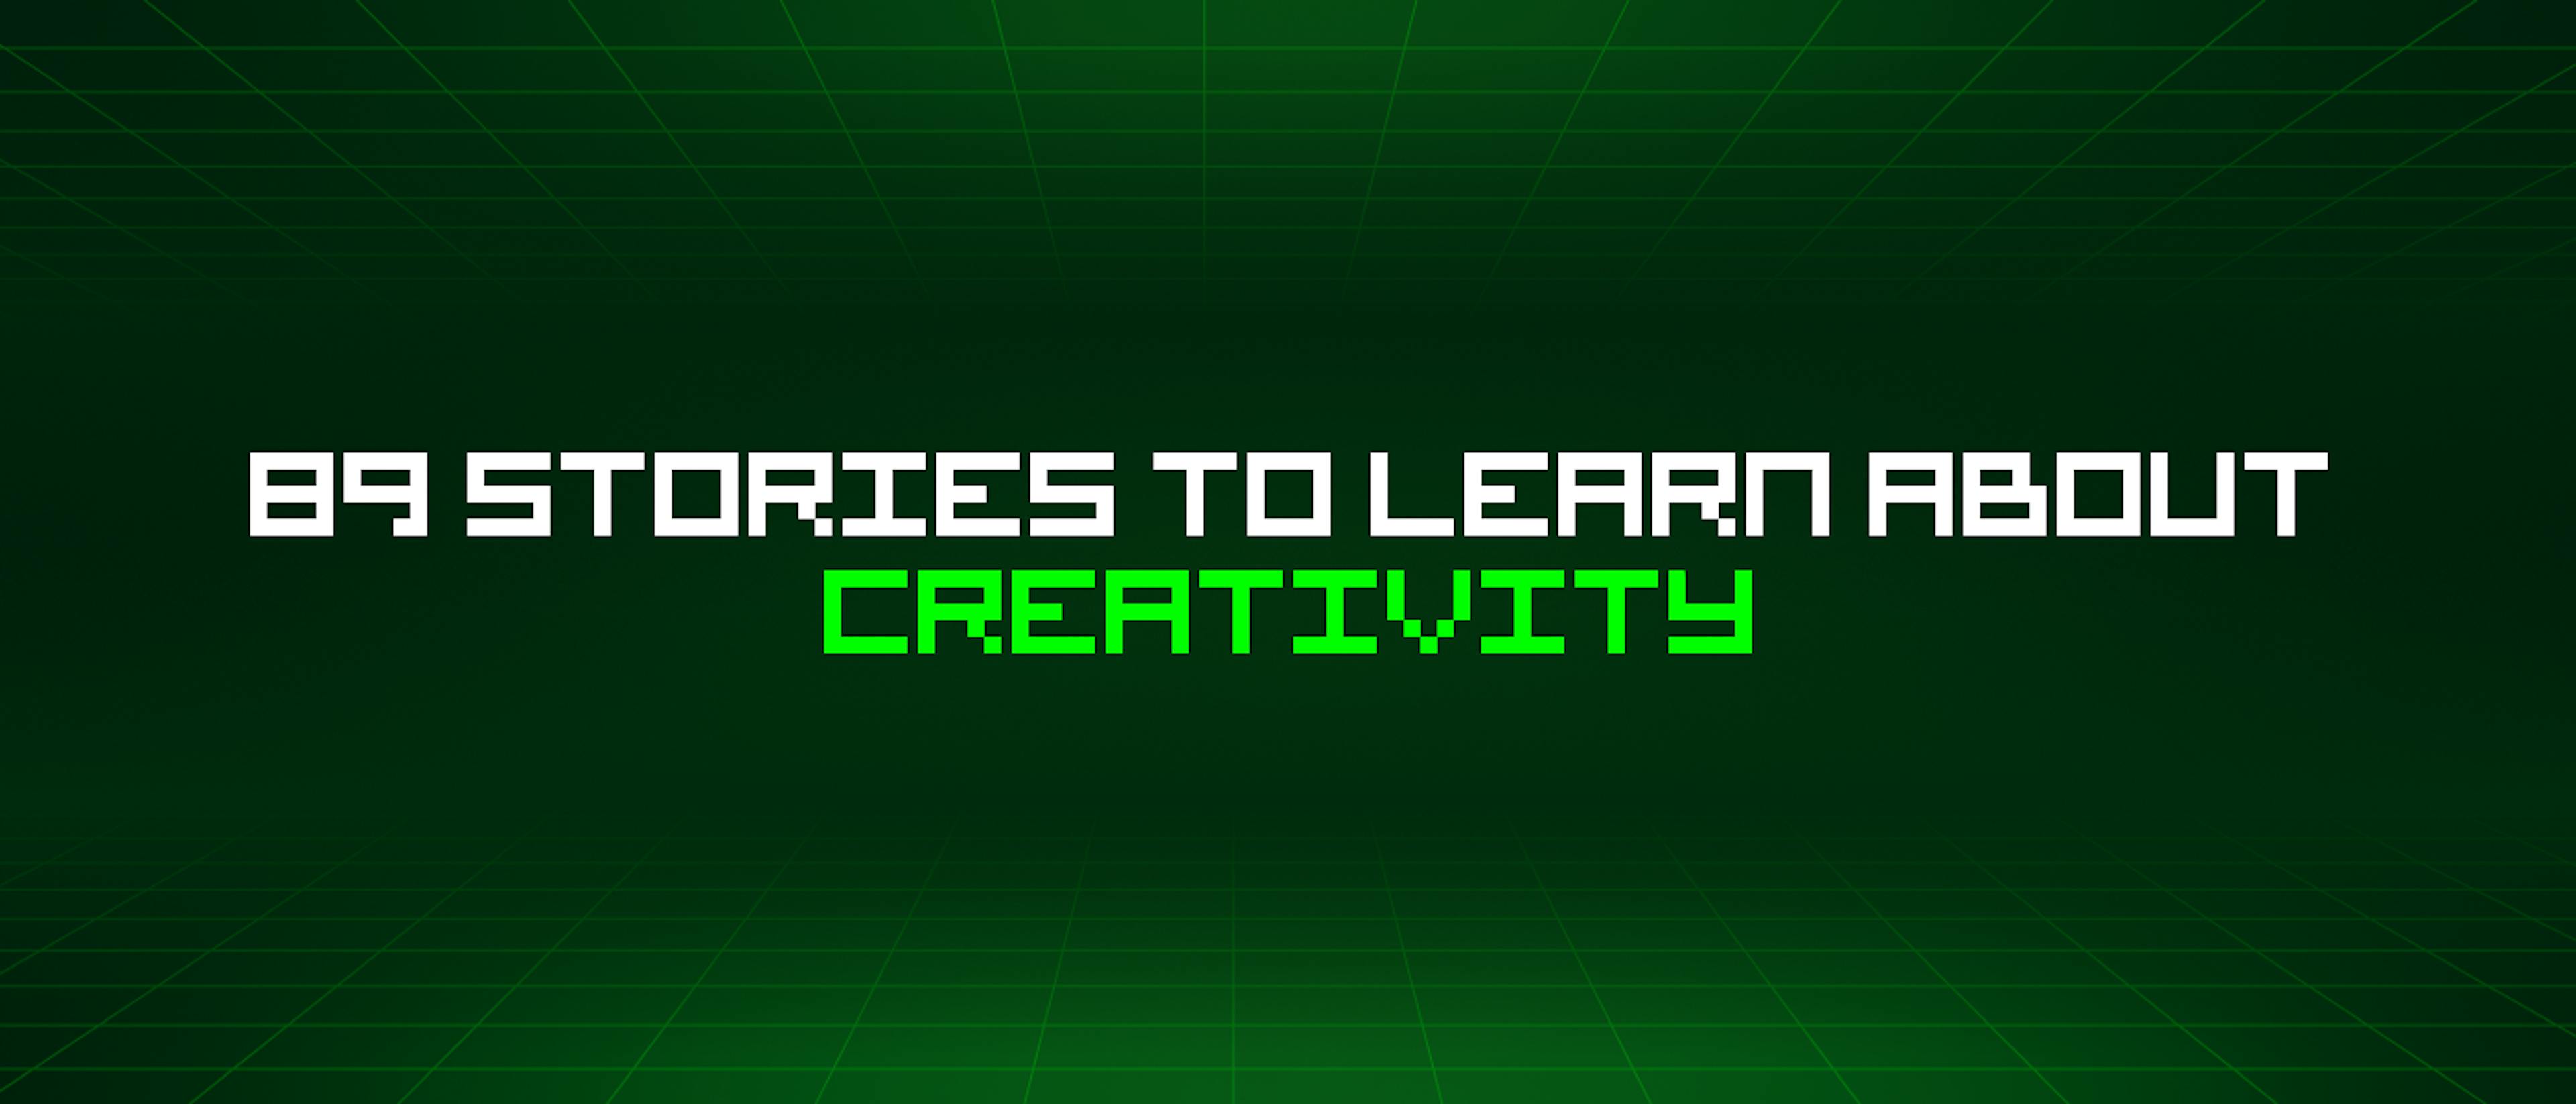 featured image - 89 Stories To Learn About Creativity